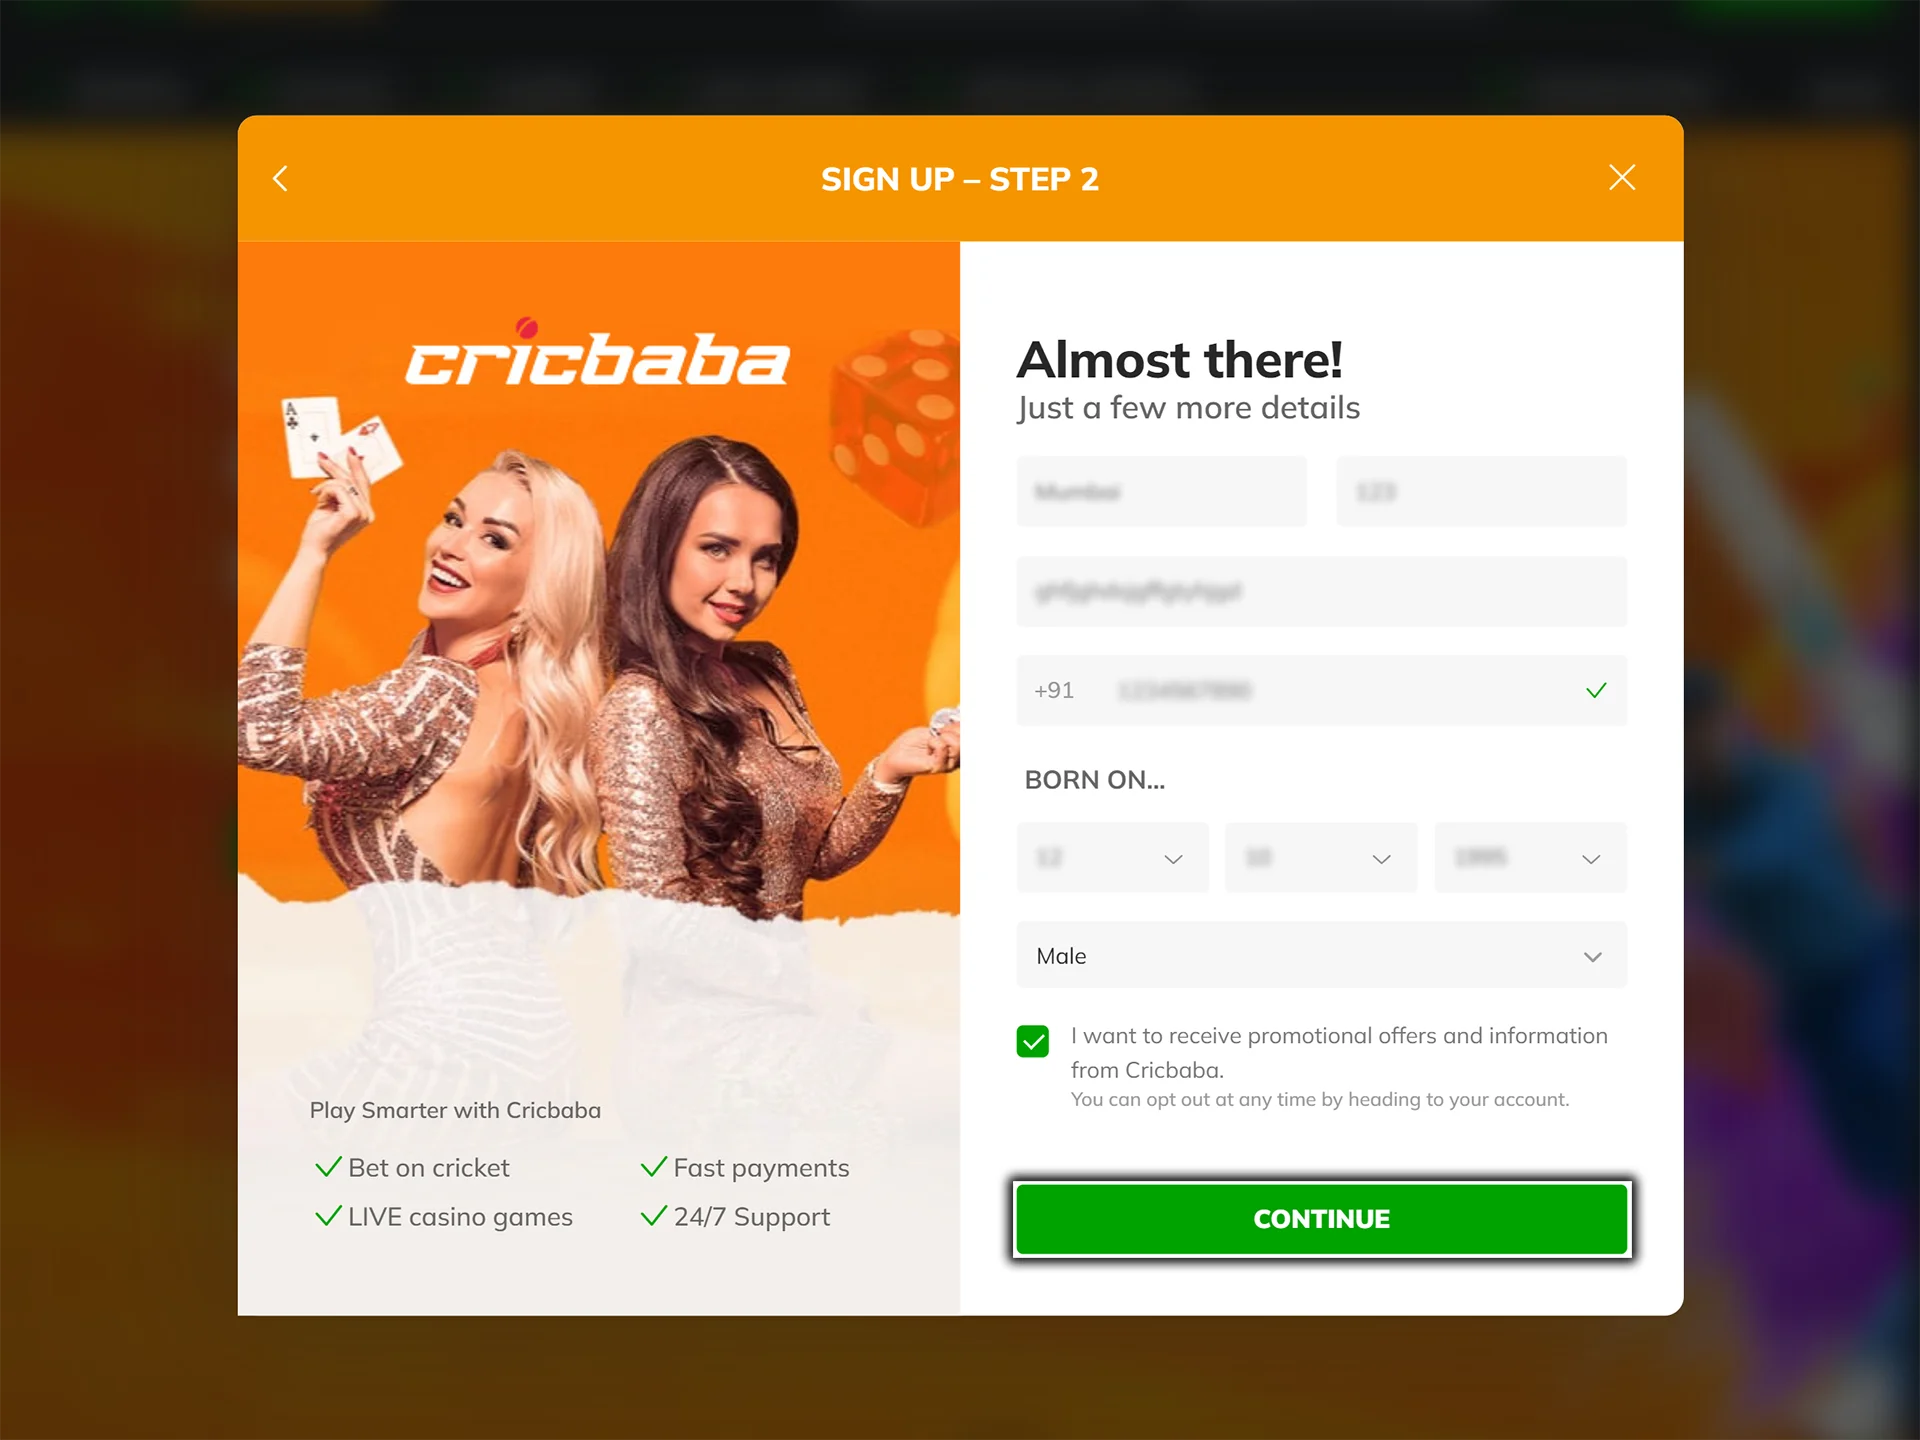 Confirm the creation of your Cricbaba account by clicking the button.